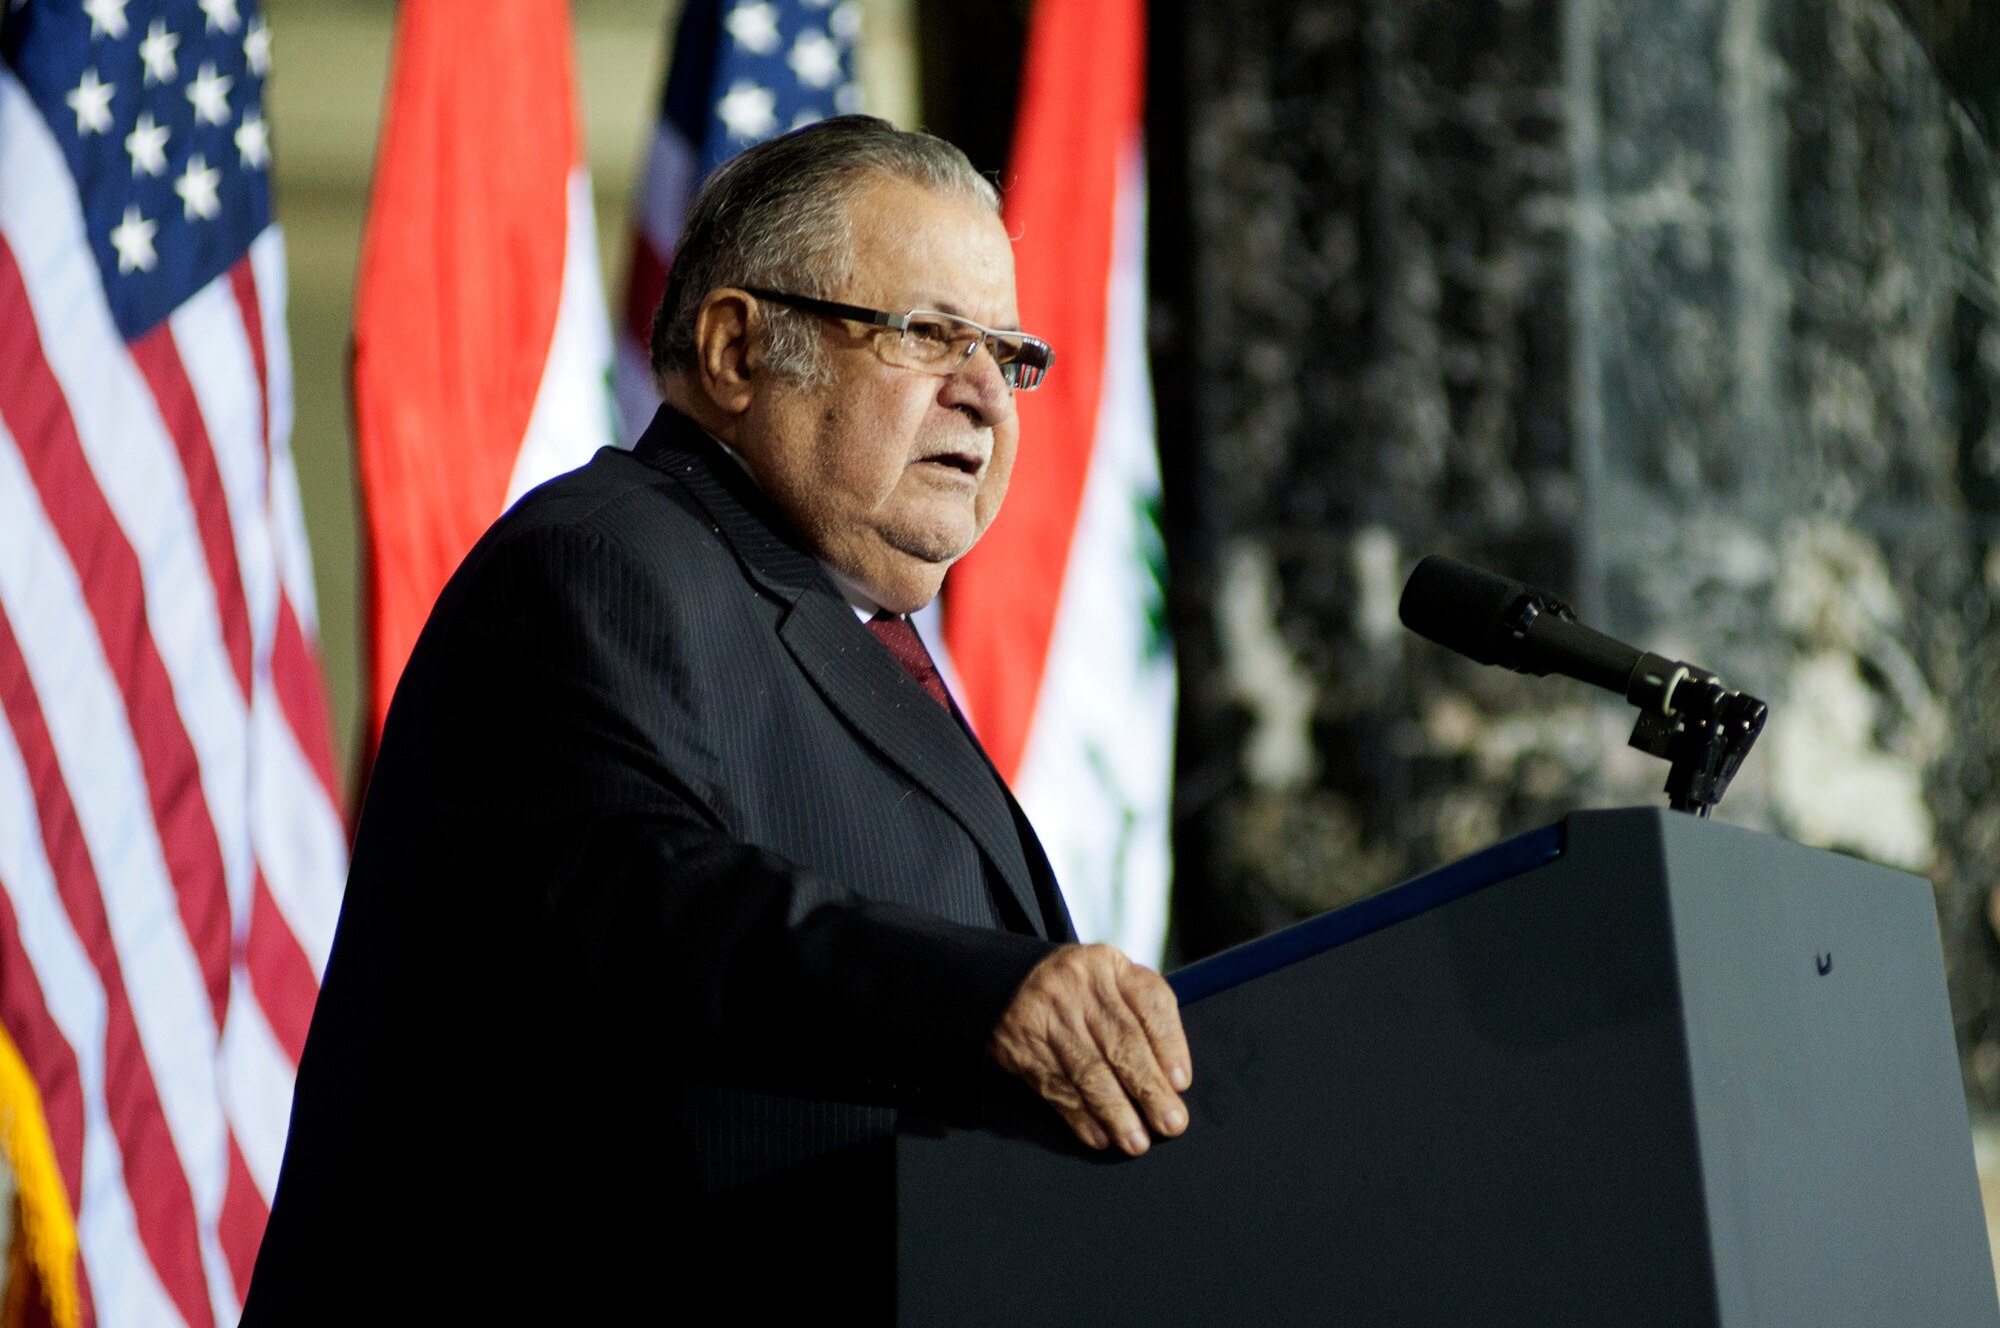 The President of Iraq, Jalal Talabani, gives a speech during the Commitment Day ceremony in the Al Faw Palace at Victory Base Complex, Iraq, on Dec. 1, 2011. The Government of Iraq hosted the ceremony to commemorate the sacrifices and accomplishments of U.S. and Iraqi service members. (U.S. Air Force photo/Master Sgt. Cecilio Ricardo)
